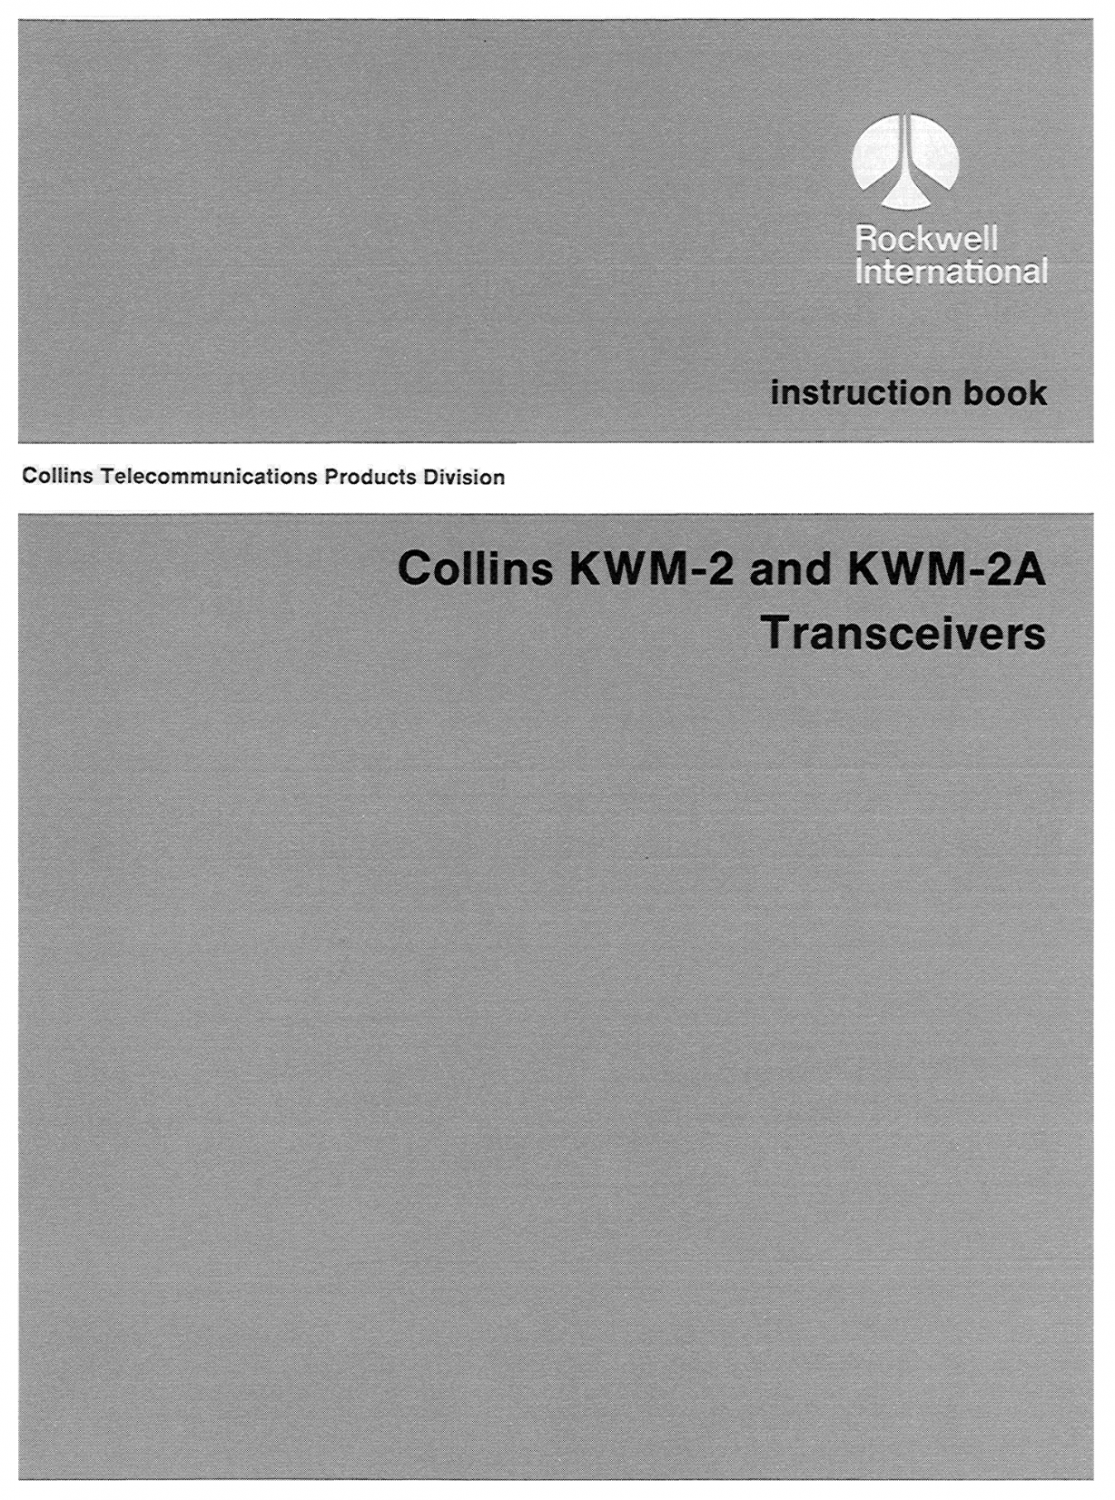 Collins KWM-2A Transceiver - Instruction Manual - 9th Edition - (1978-01)